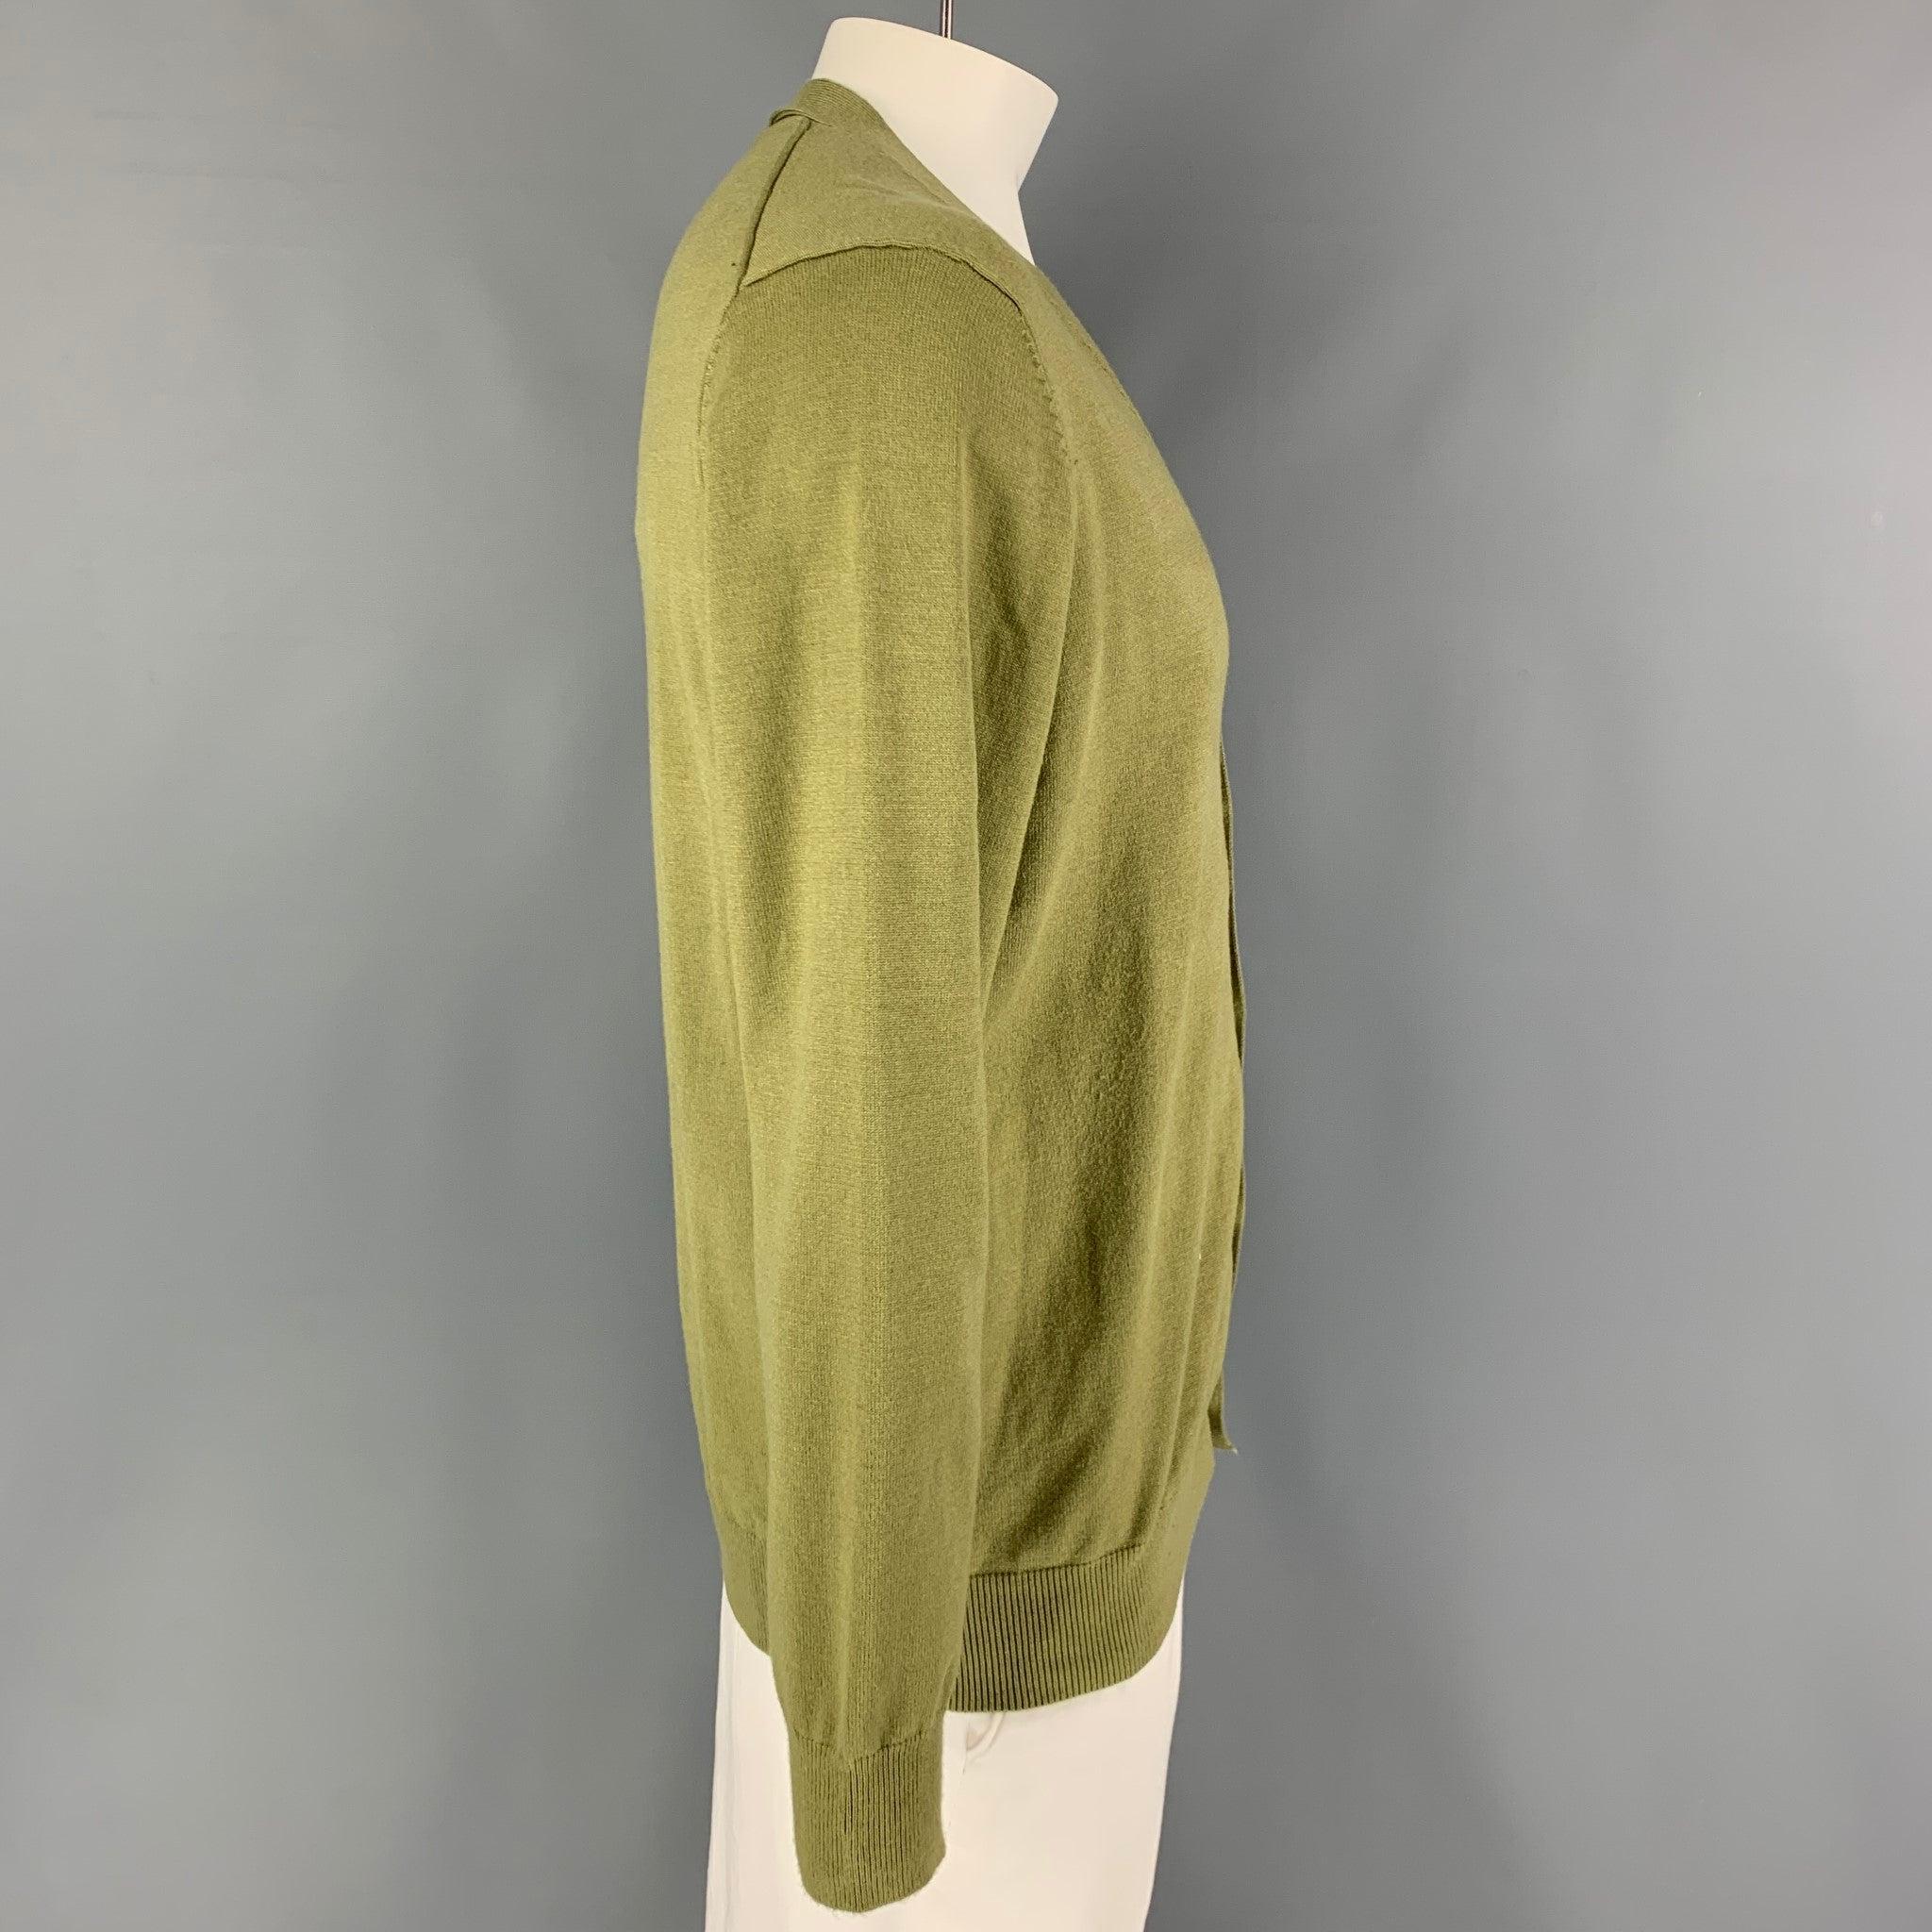 KITON cardigan comes in a green cashmere / silk featuring a buttoned closure. Made in Italy.
New with tags.
 

Marked:   L/52 

Measurements: 
 
Shoulder: 18 inches Chest: 42 inches Sleeve: 28 inches Length: 27 inches 

  
  
 
Reference: